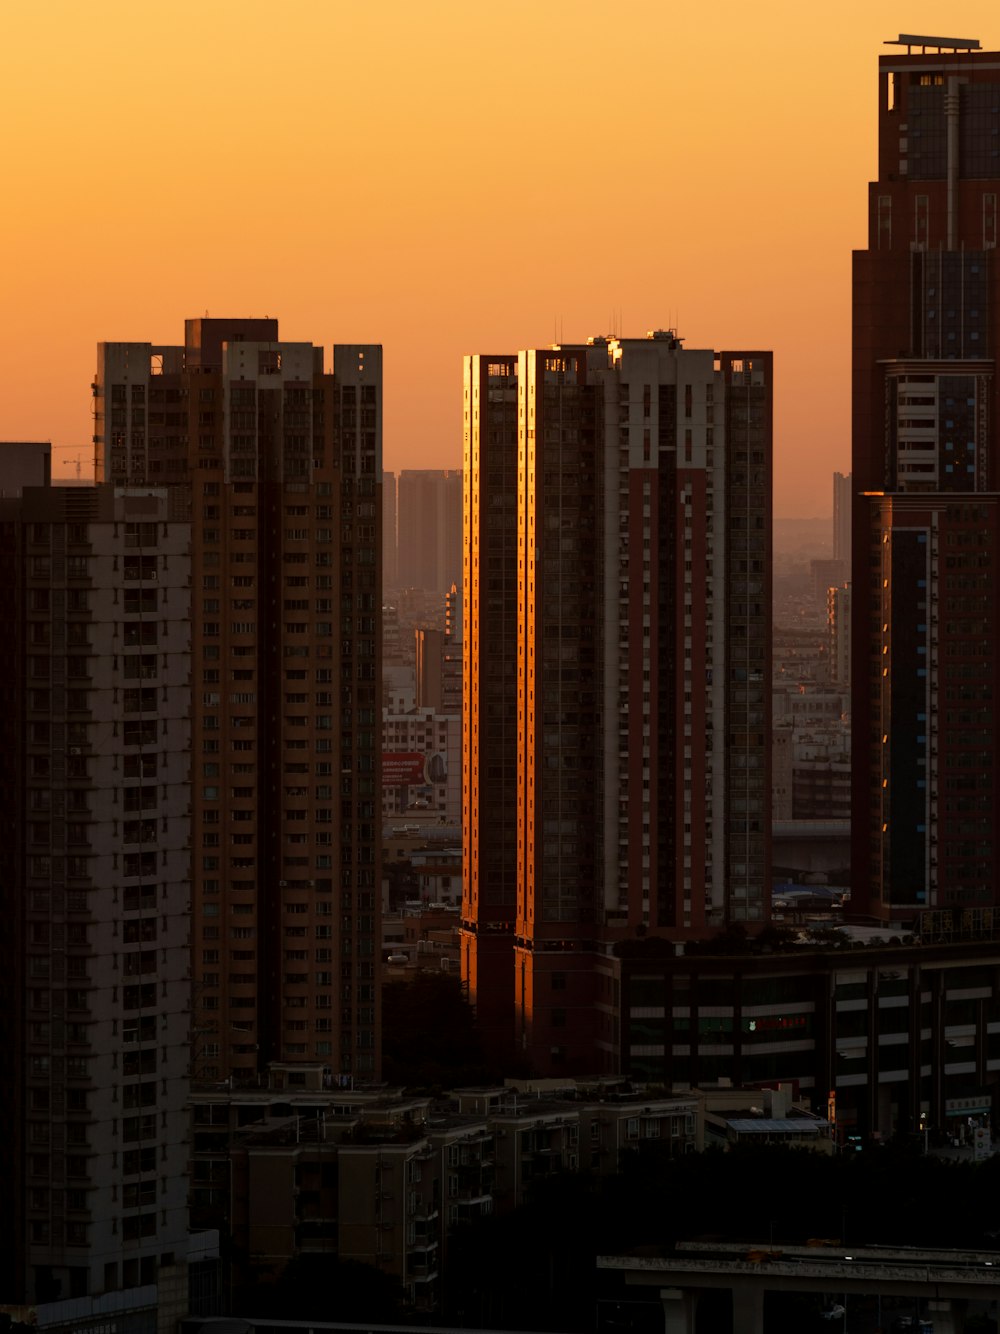 a view of a city with tall buildings at sunset